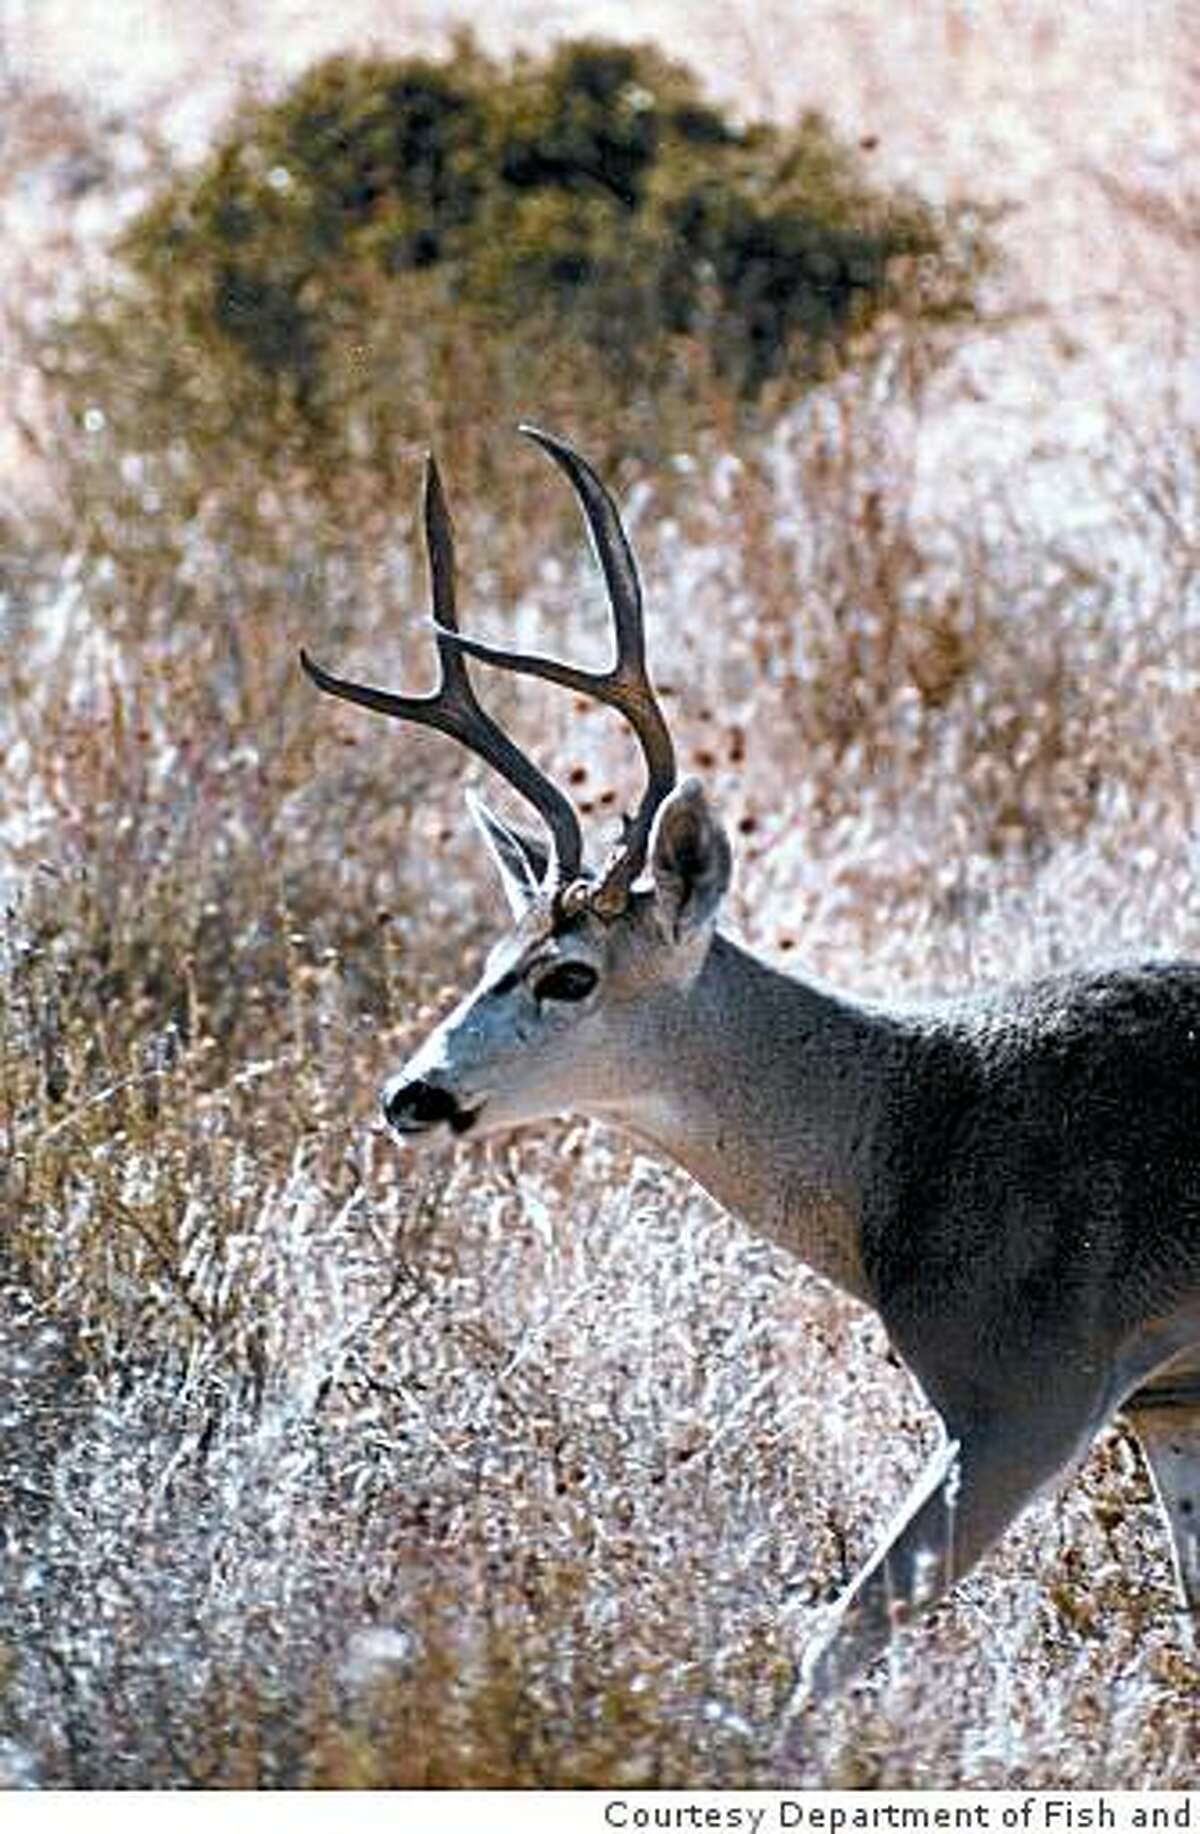 Forked-horn black-tailed deer, often found in California's coastal mountains and on the western slope of the Sierra Nevada